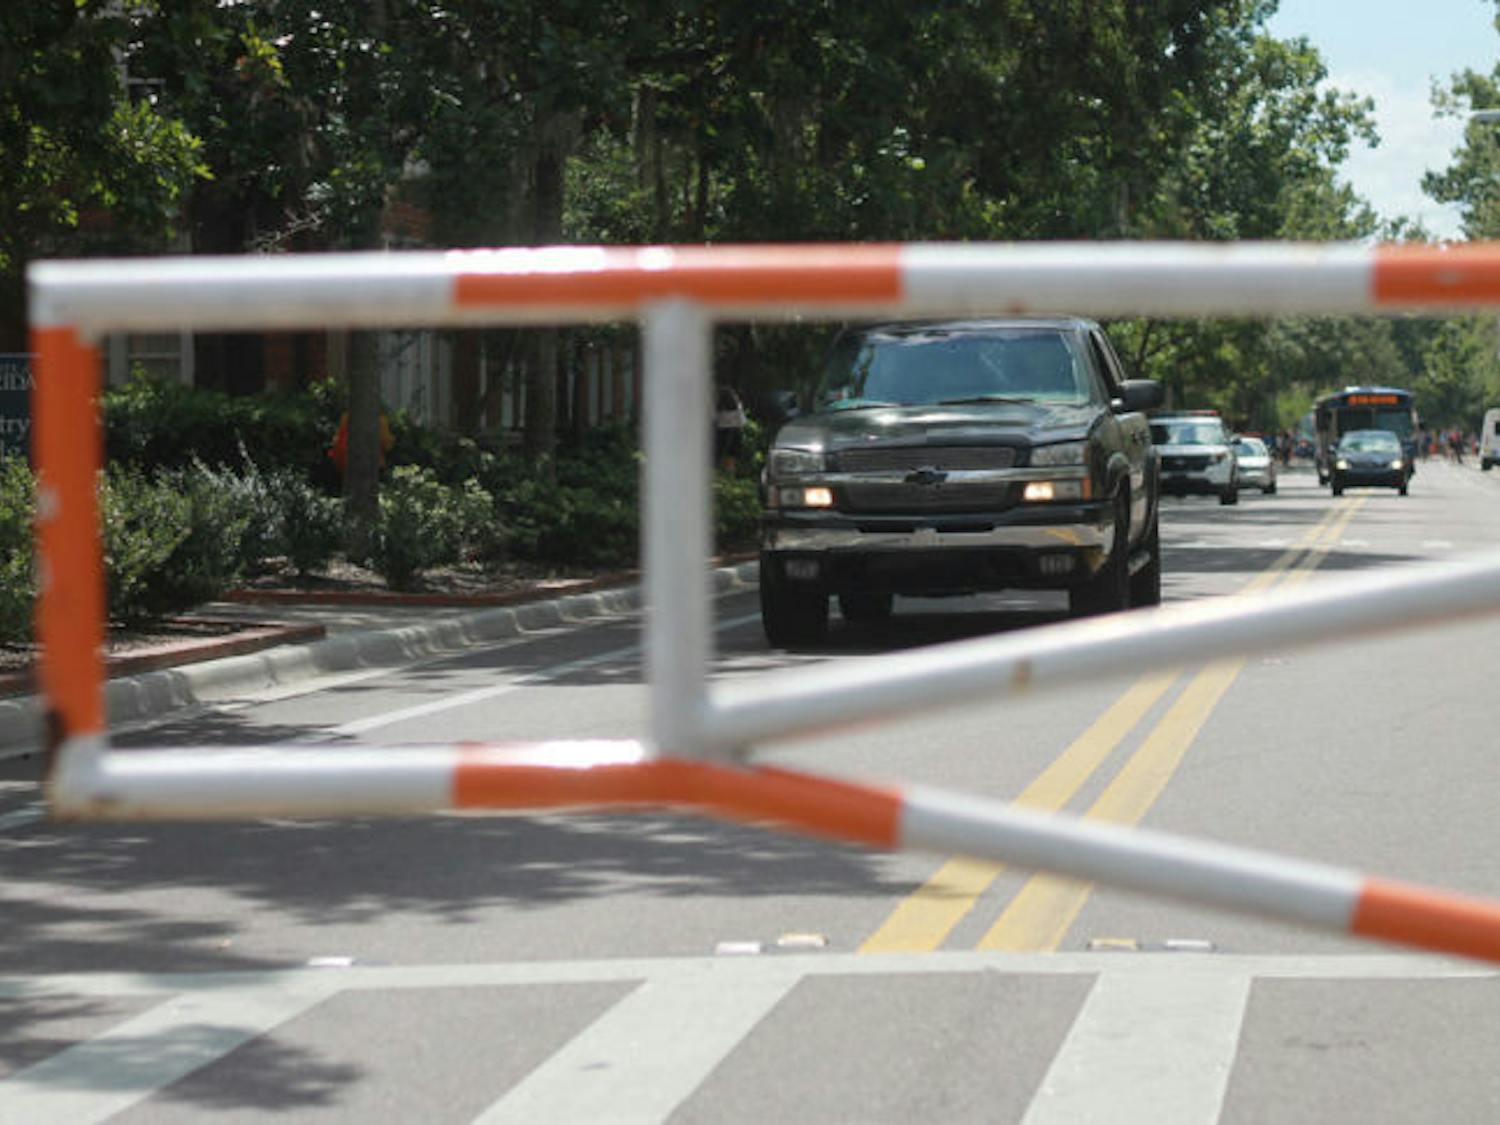 A driver attempts to drive around the barrier blocking Buckman Drive on Sept. 19. University Police frequently pulls over drivers crossing these barriers.